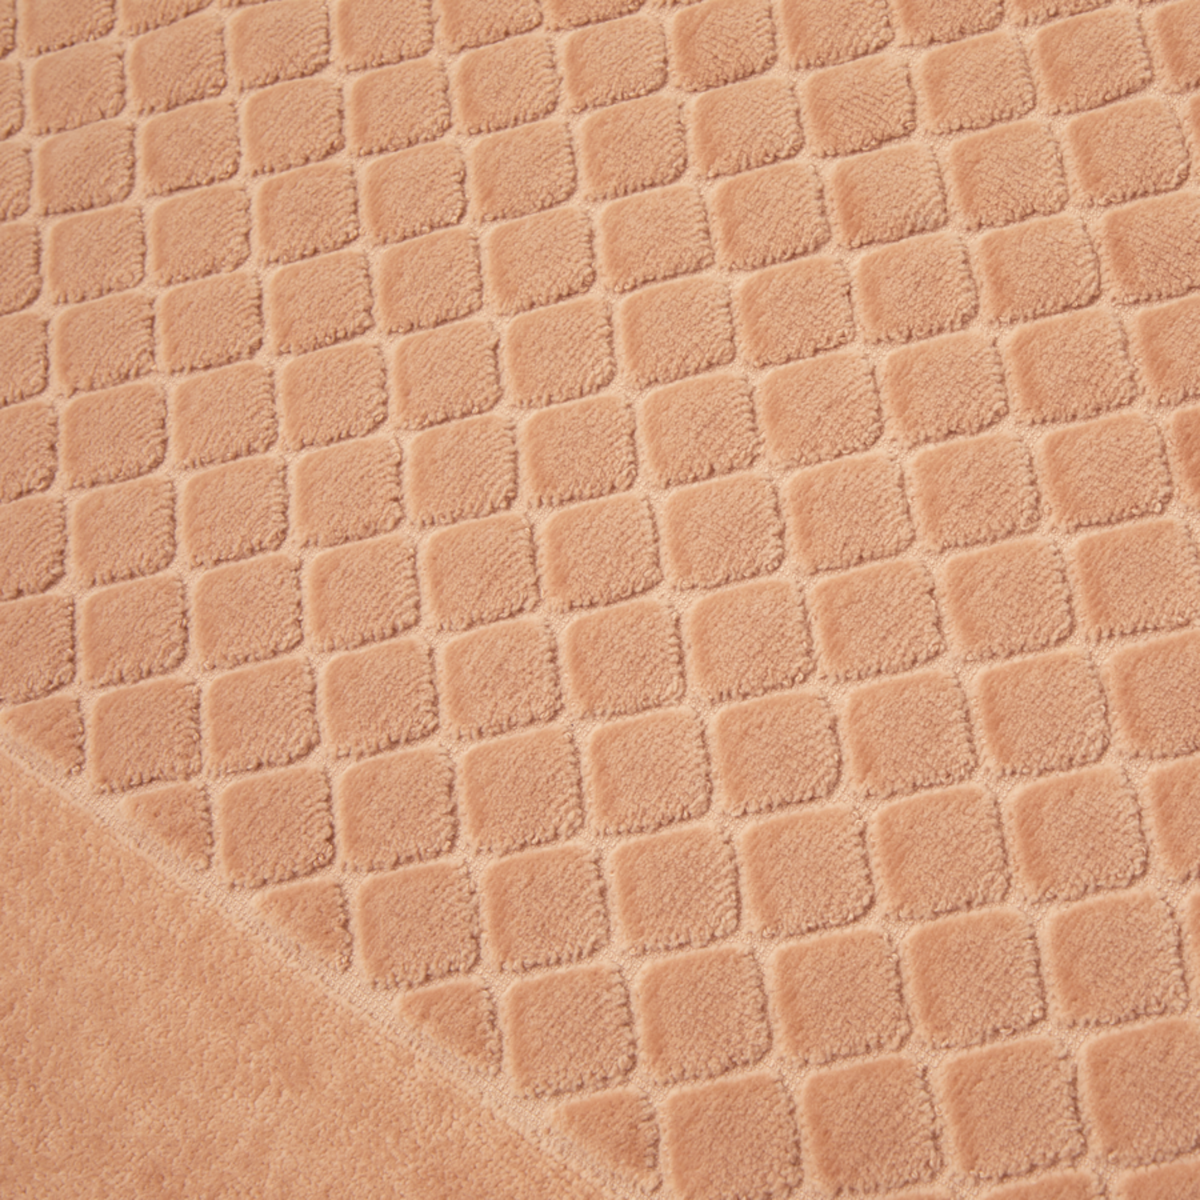 Bath Mat Closeup of Yves Delorme Etoile Bath Collection in Sienna Color